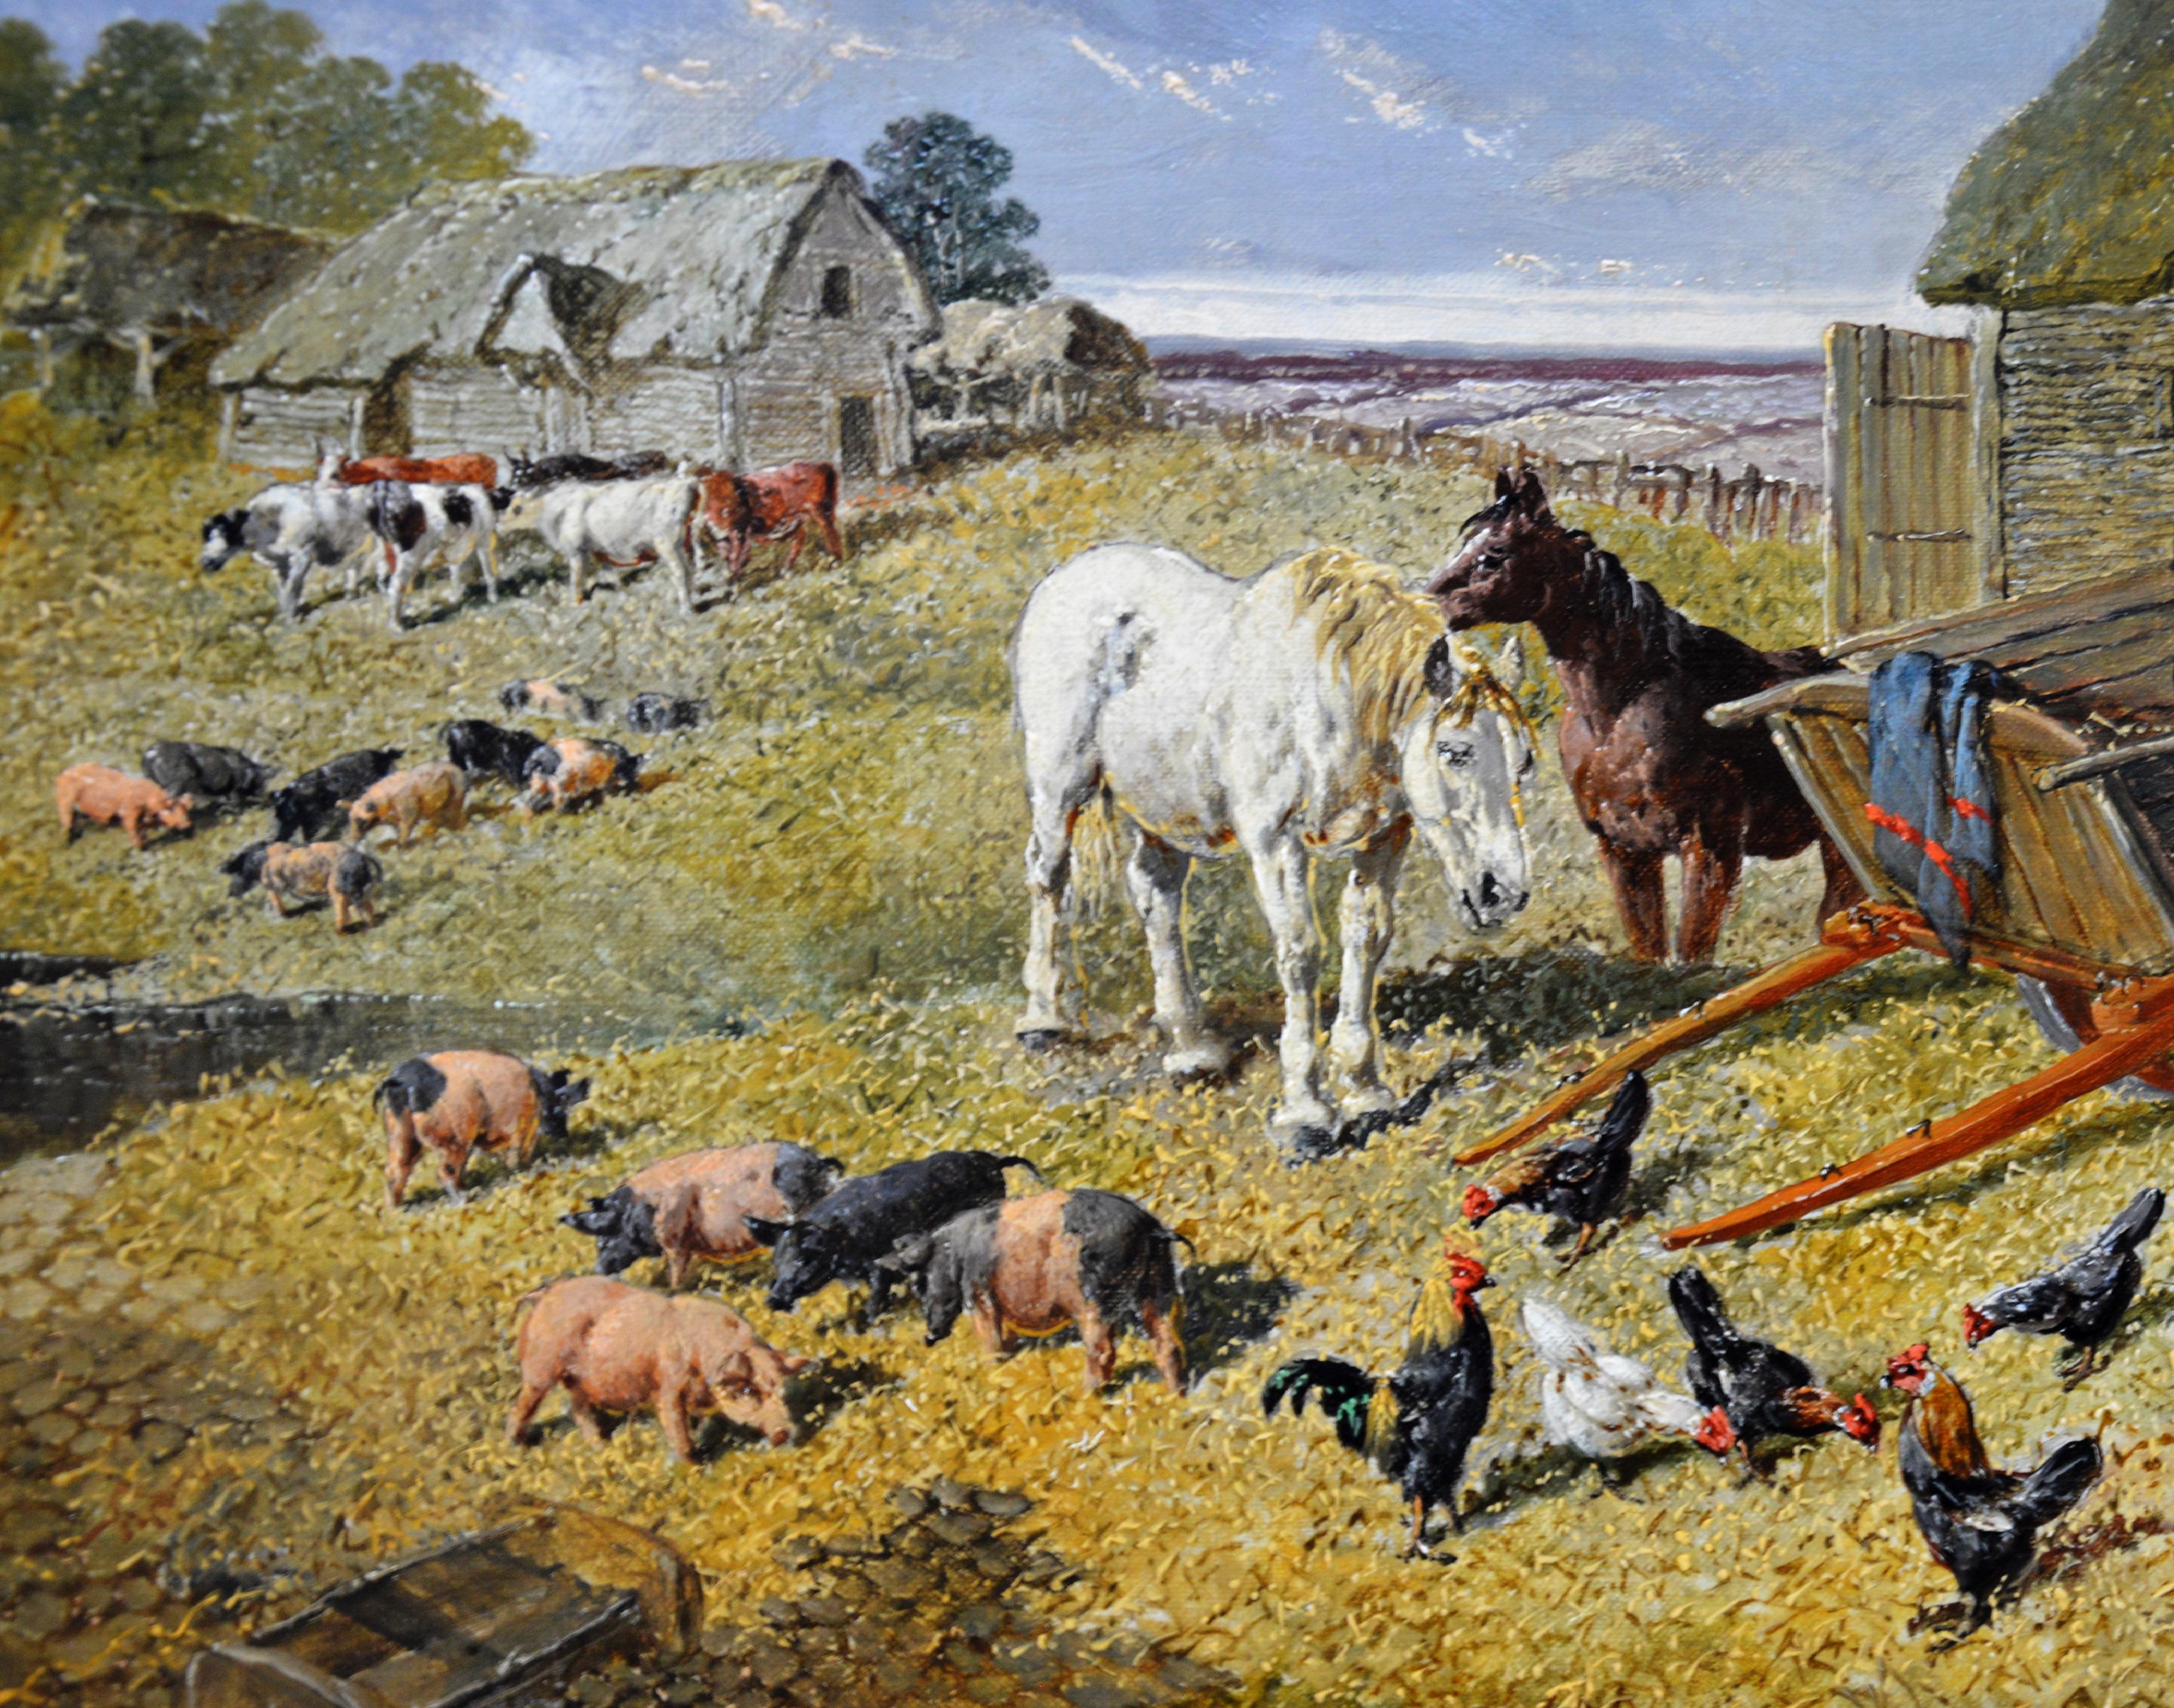 This is a fine 19th century English landscape oil on canvas depicting horses, chickens and pigs on a farm by the eminent Victorian painter John Frederick Herring Jr. (1820-1907). ‘The Farmyard’ is signed by the artist and is sold in a superb quality